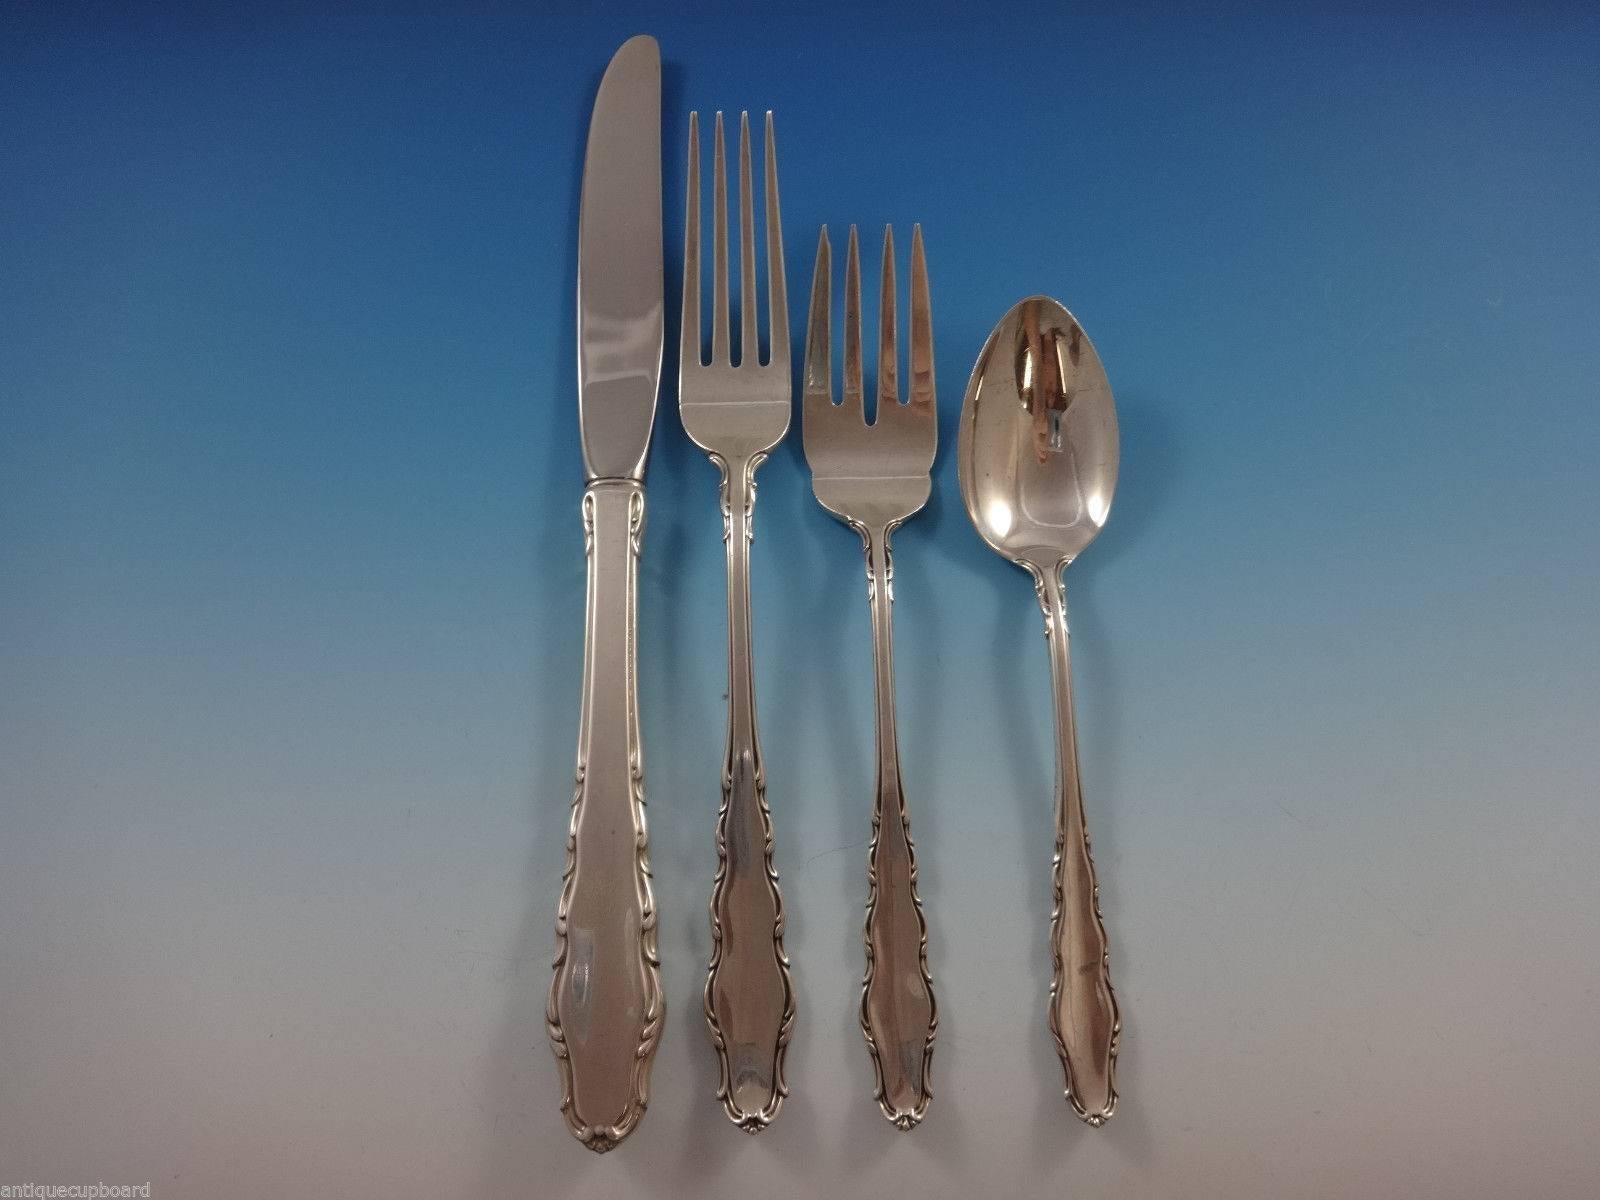 English Provincial by Reed & Barton sterling silver flatware set - 32 pieces. This set includes:

Eight knives, 9 1/8